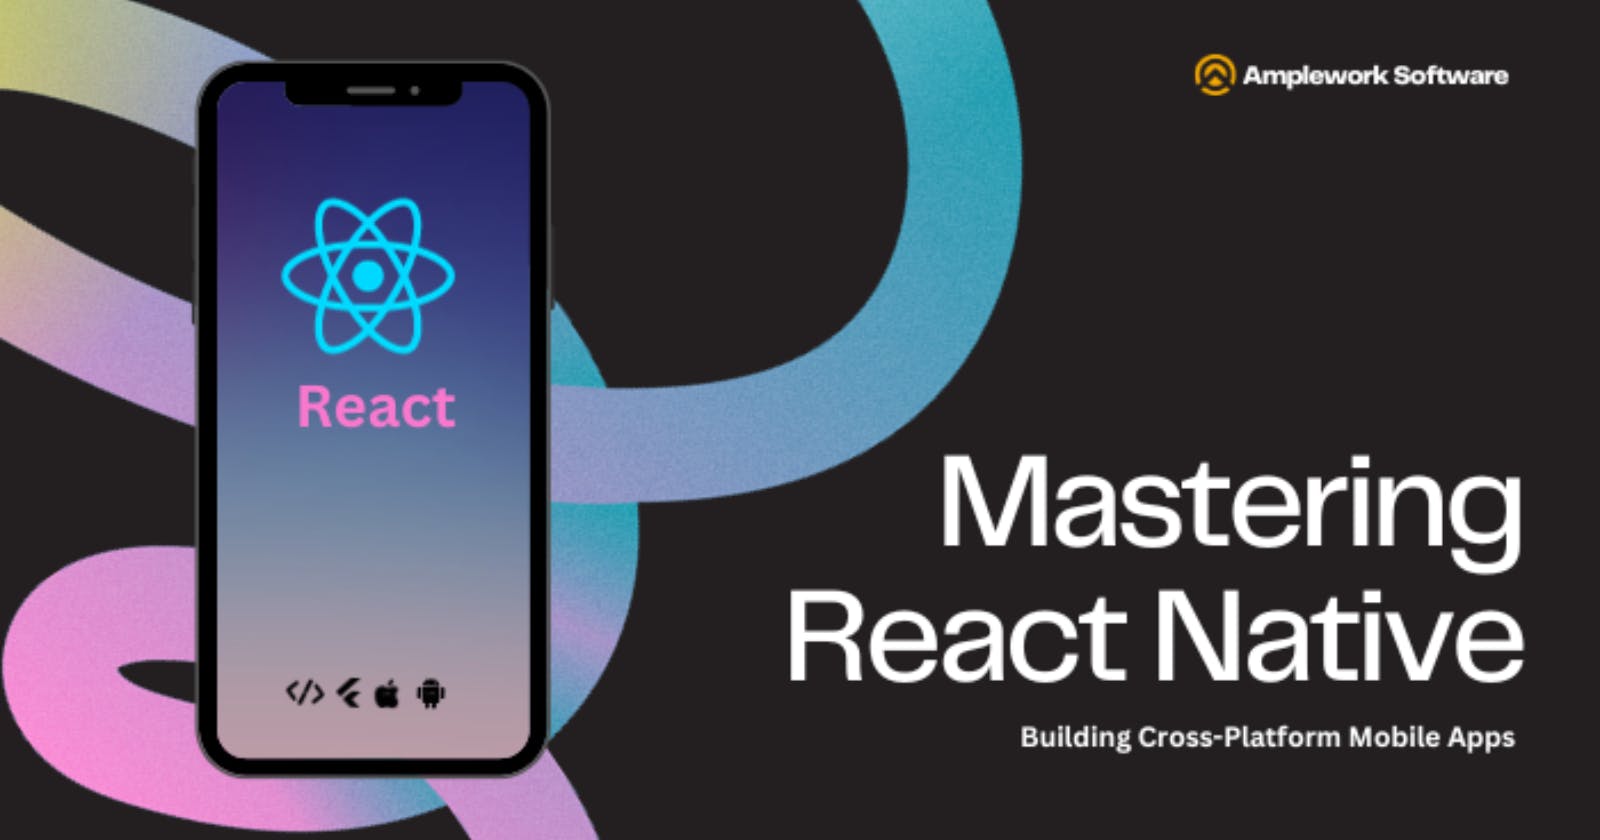 Mastering React Native: Building Cross-Platform Mobile Apps with Efficiency